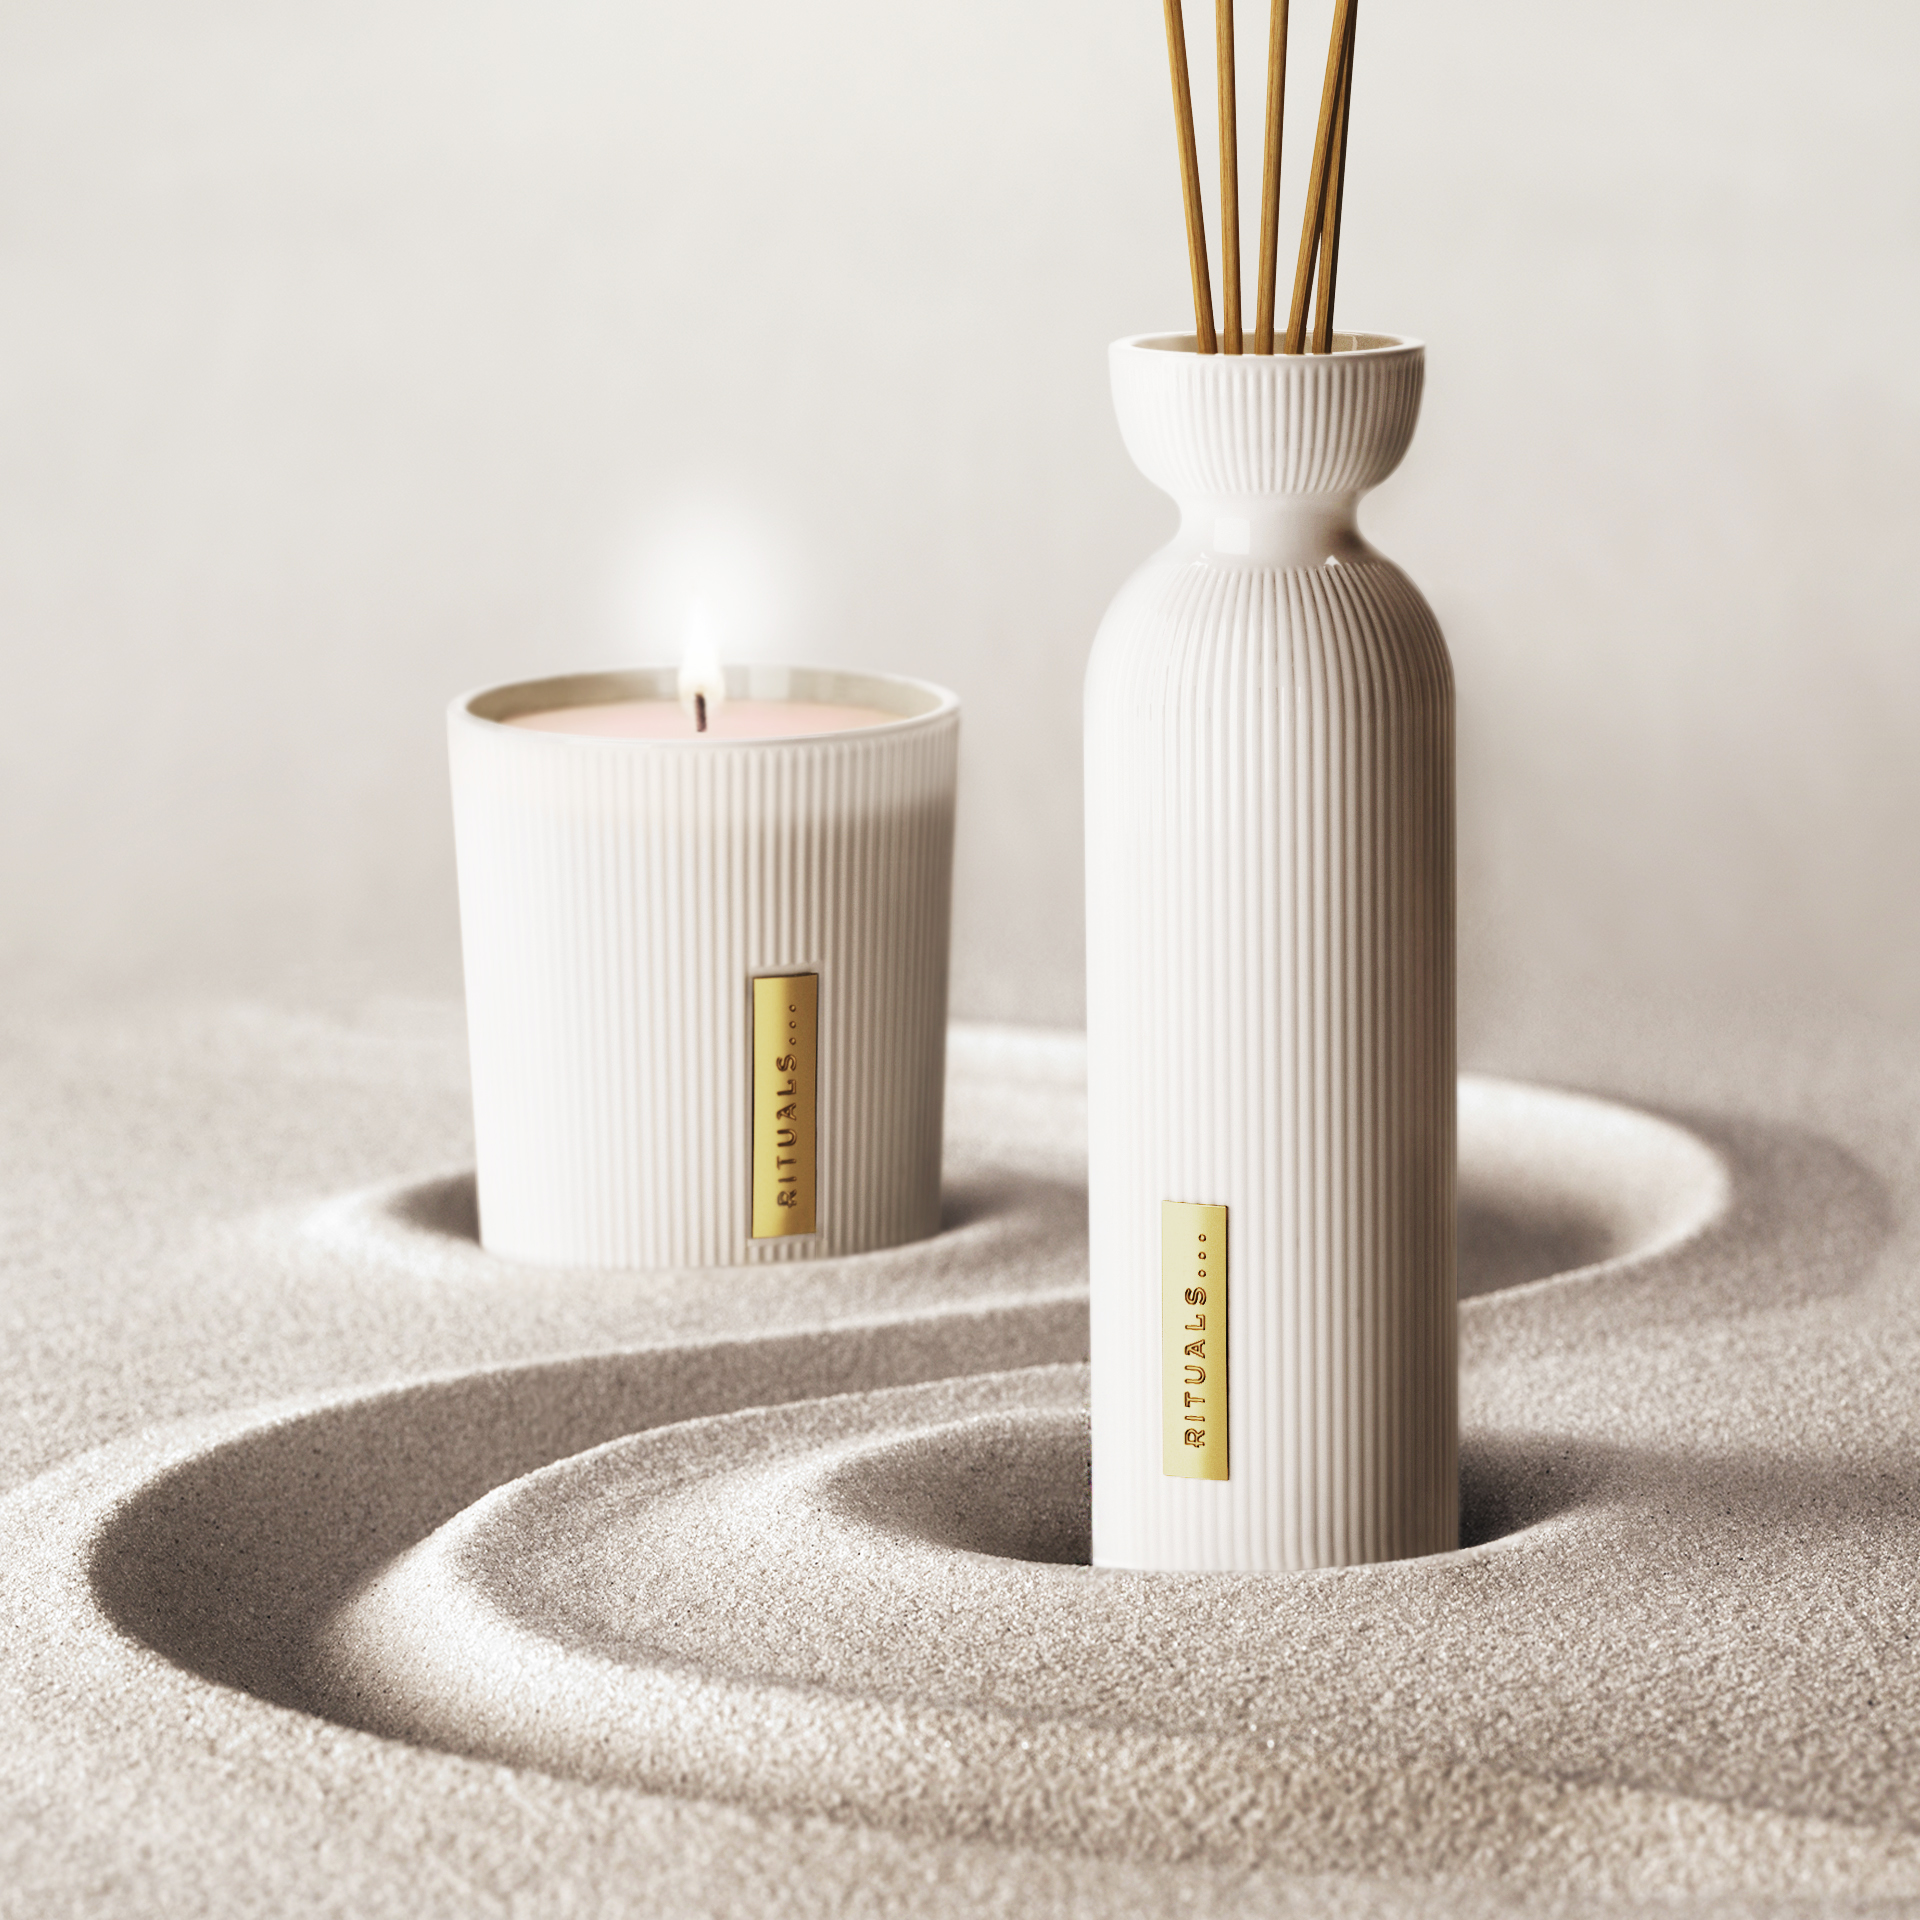 RITUALS. Home fragrance collection (Sticks and Candles). by SERIESNEMO - Creative Work